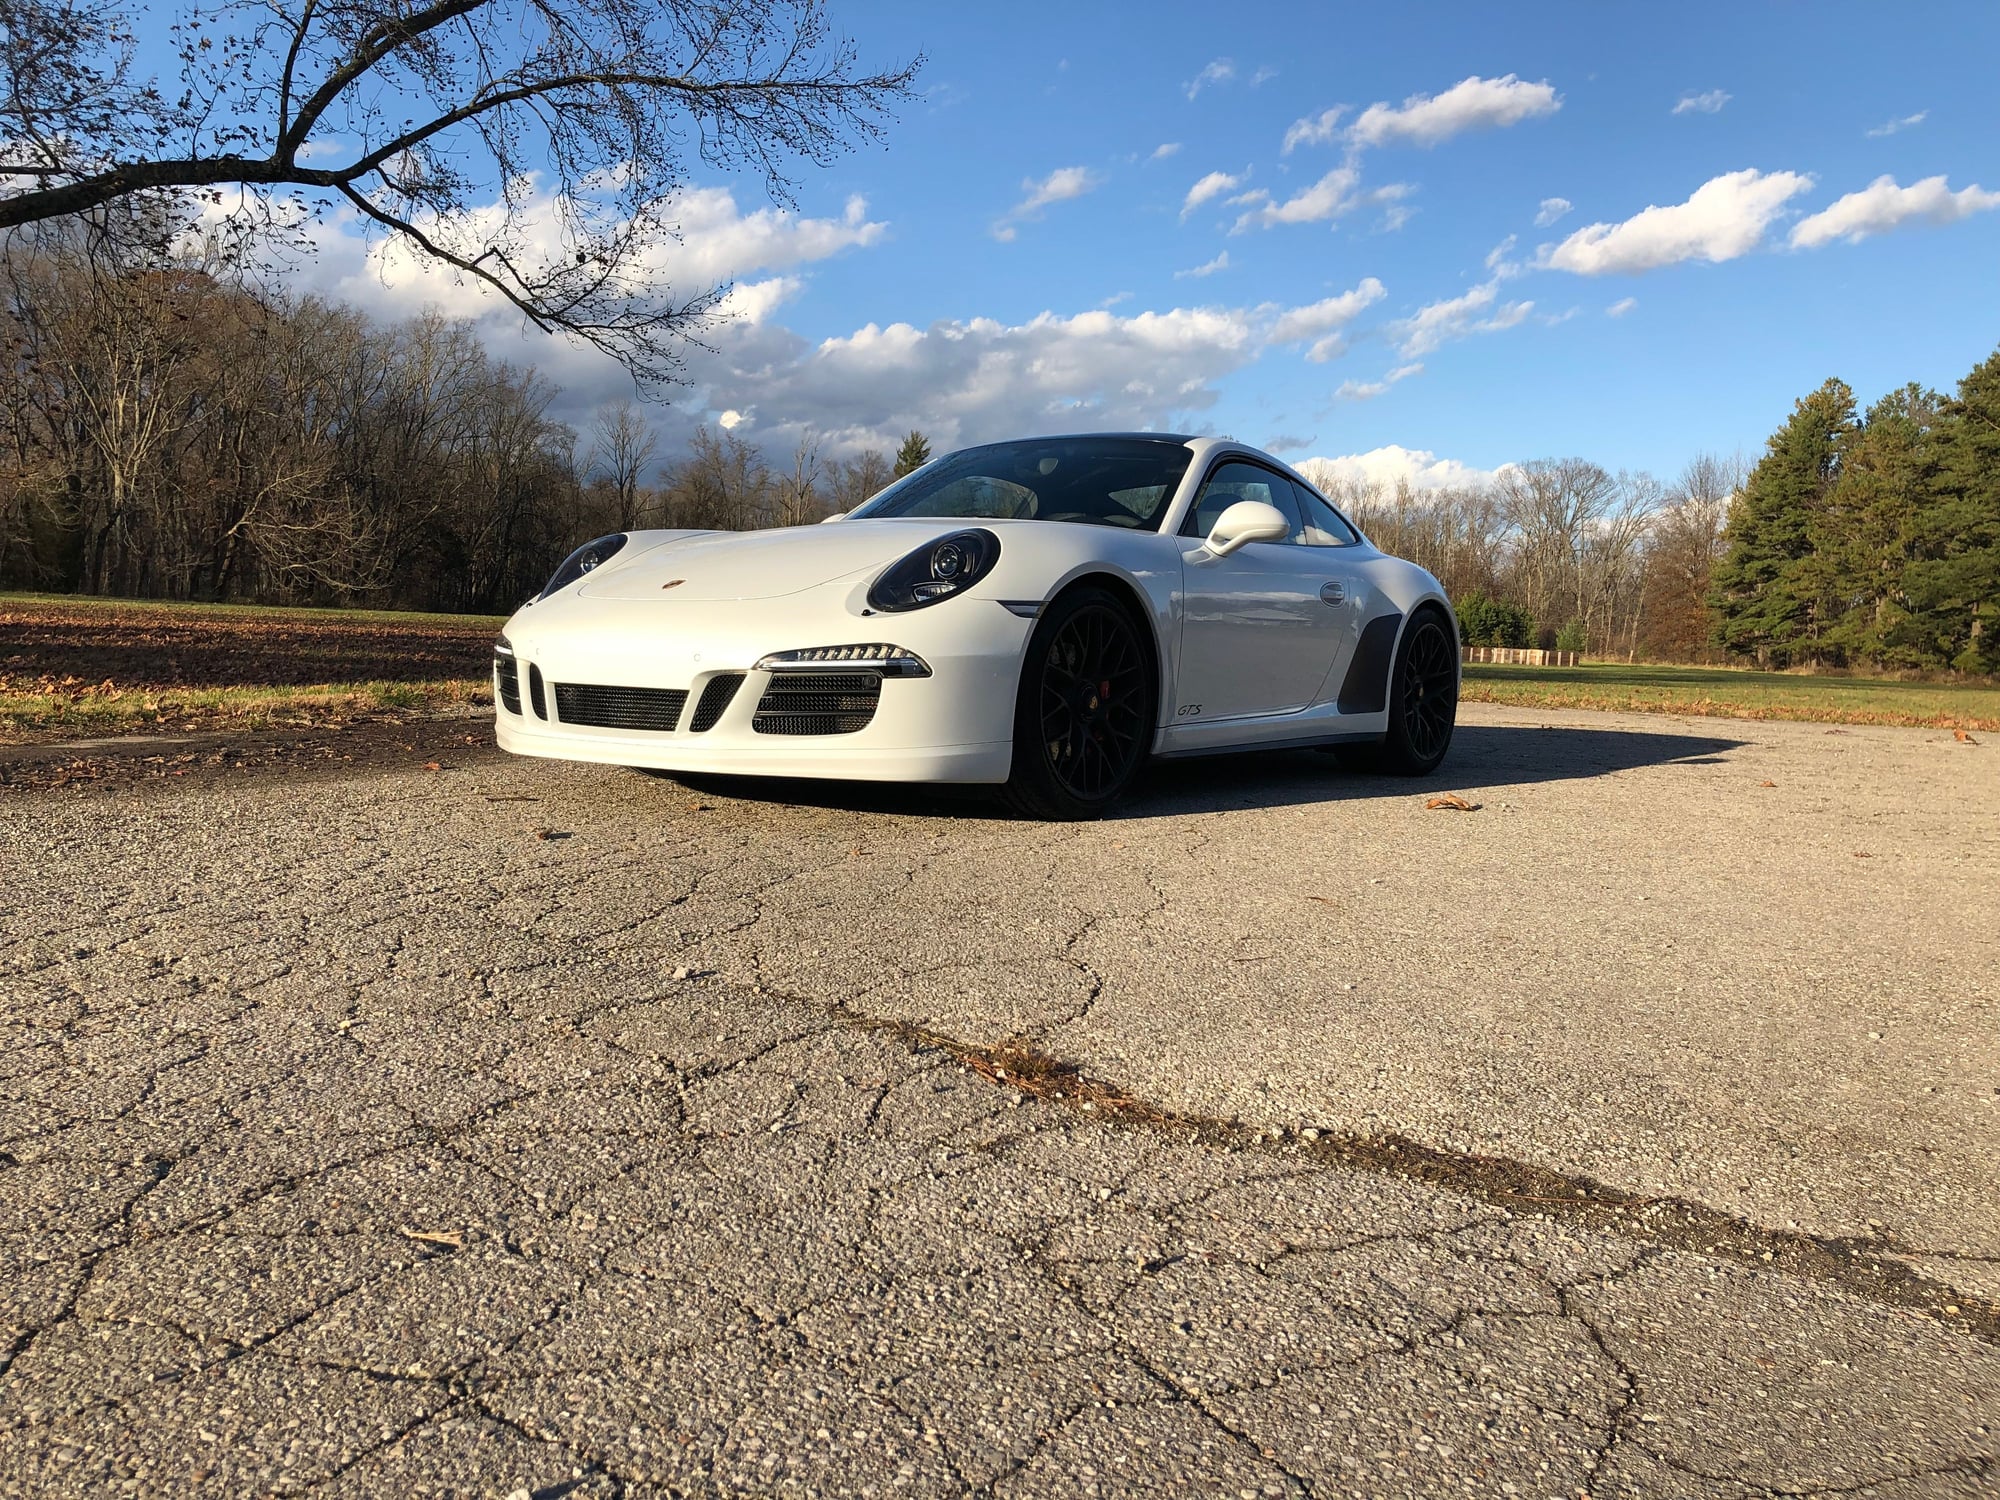 2015 Porsche 911 - FS: 2015 911 GTS - Used - VIN To Be Provided - 21,000 Miles - 6 cyl - 2WD - White - Cincinnati, OH 45039, United States